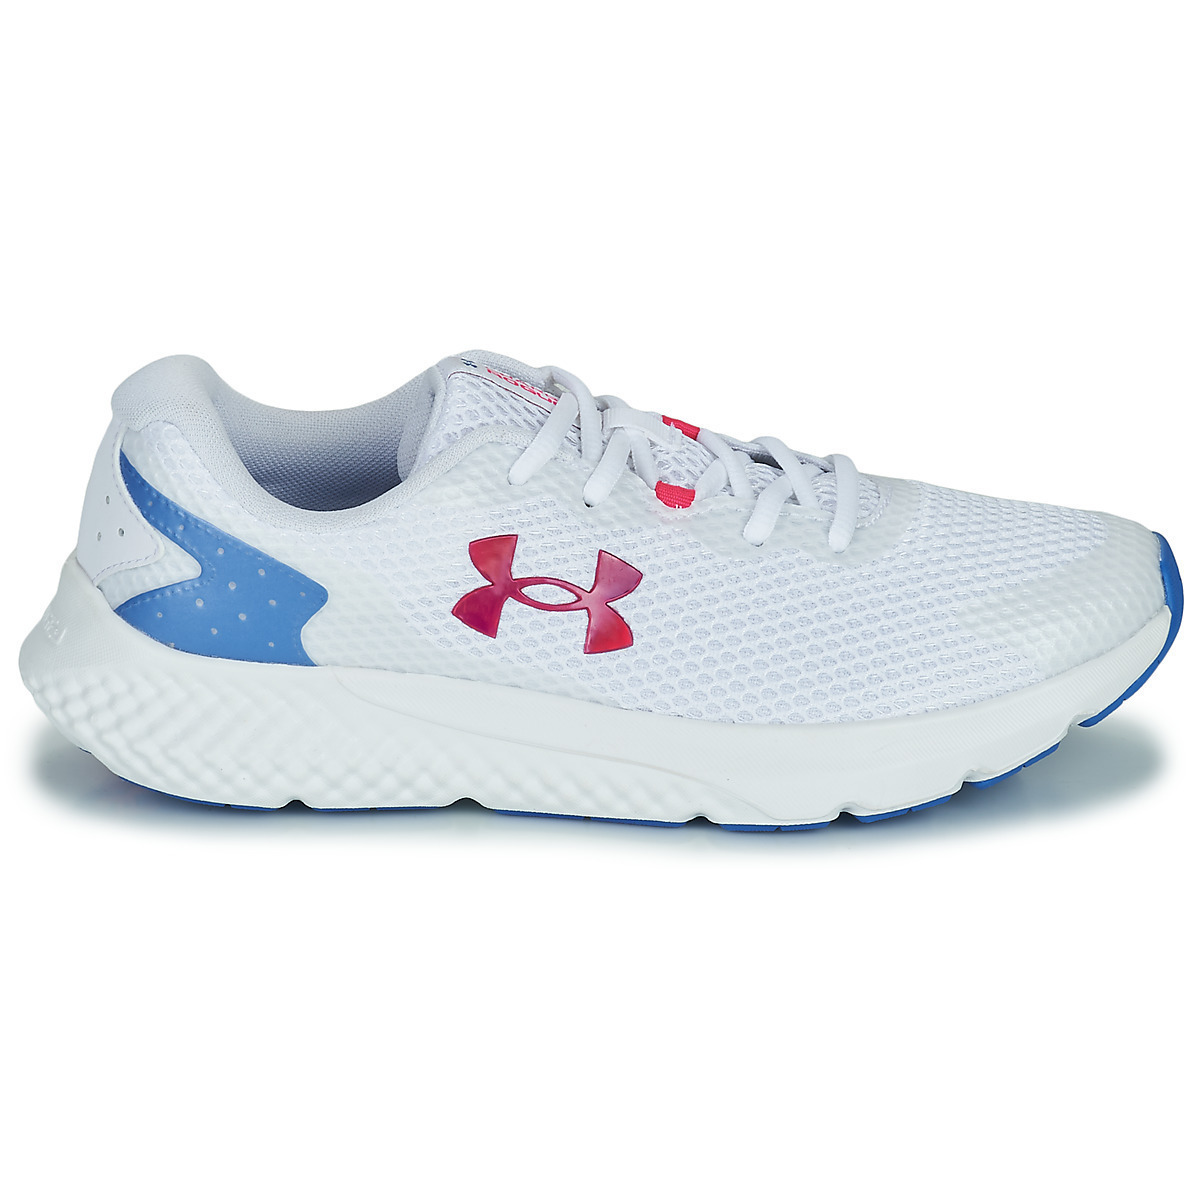 Under Armour Charged Rogue 3 %COLOUR%